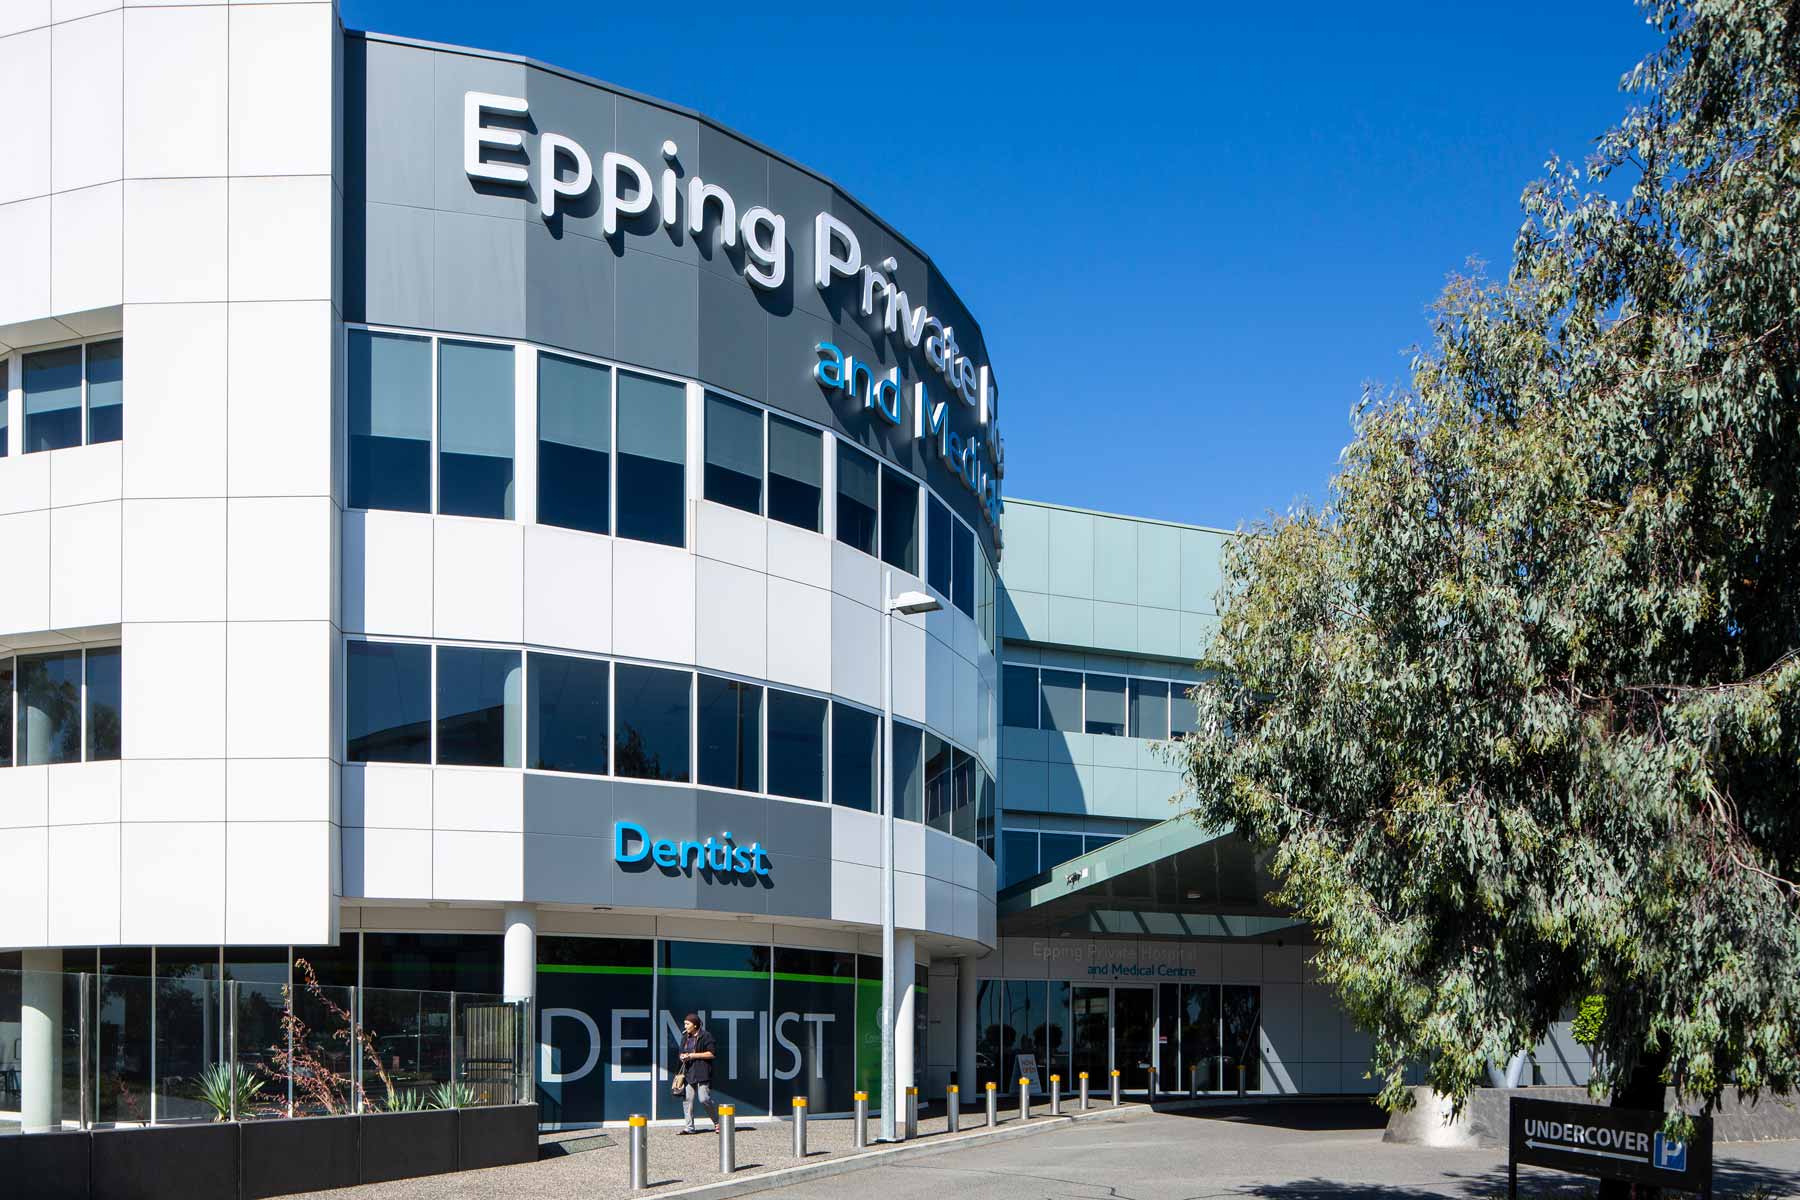 Epping Medical Centre on Cooper Street